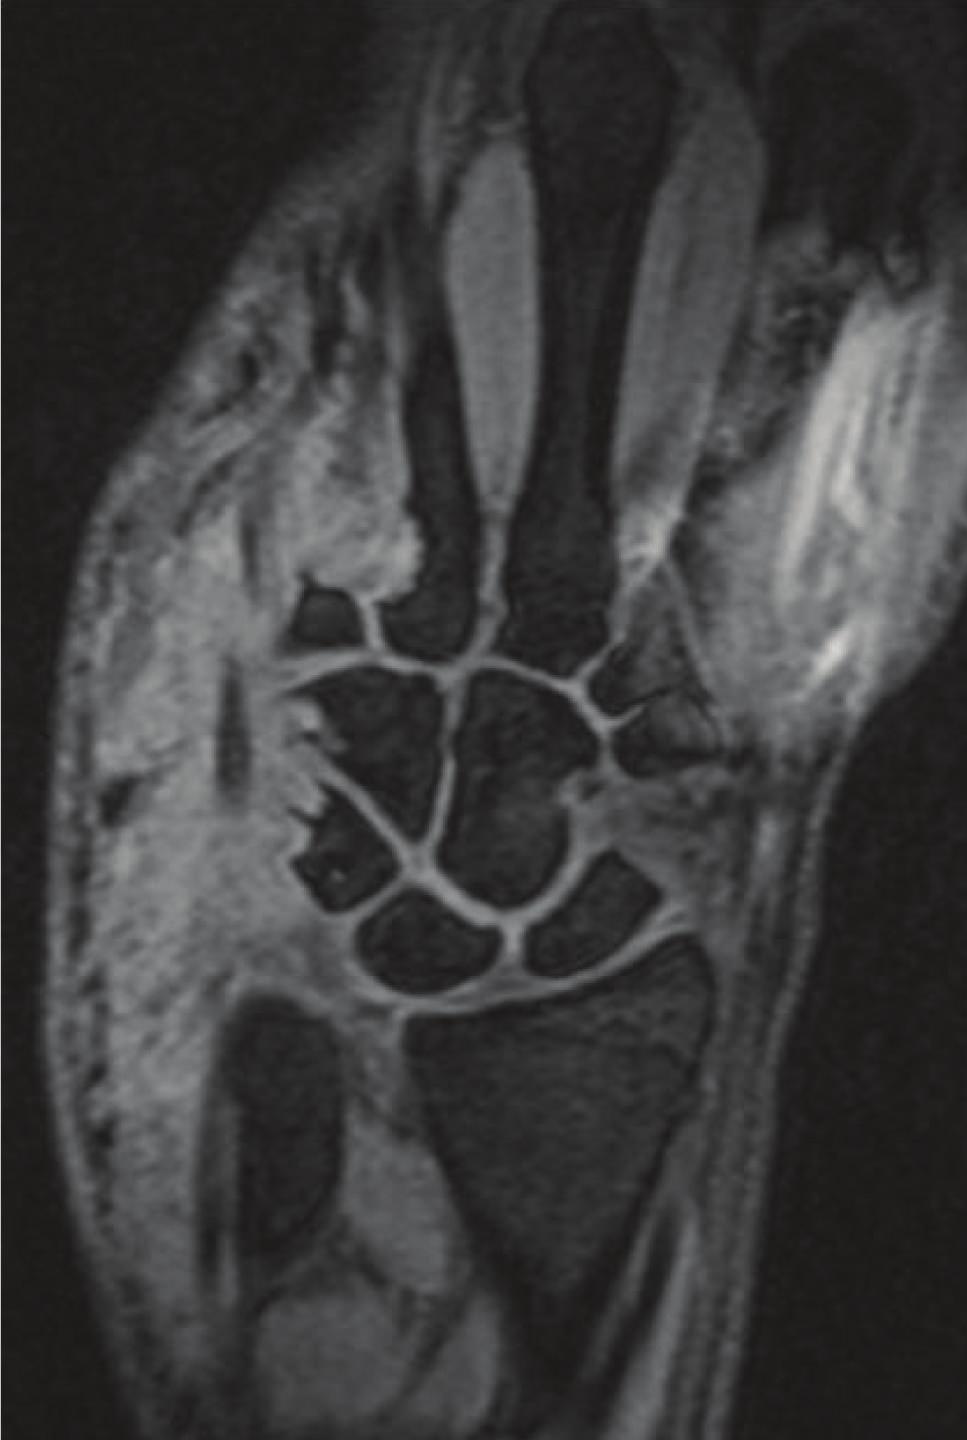 Figure 4: Ultrasound of the wrist conglomerate multilobulated lesions with target appearance (white arrows): central hyperechogenicity with hypoechoic periphery.